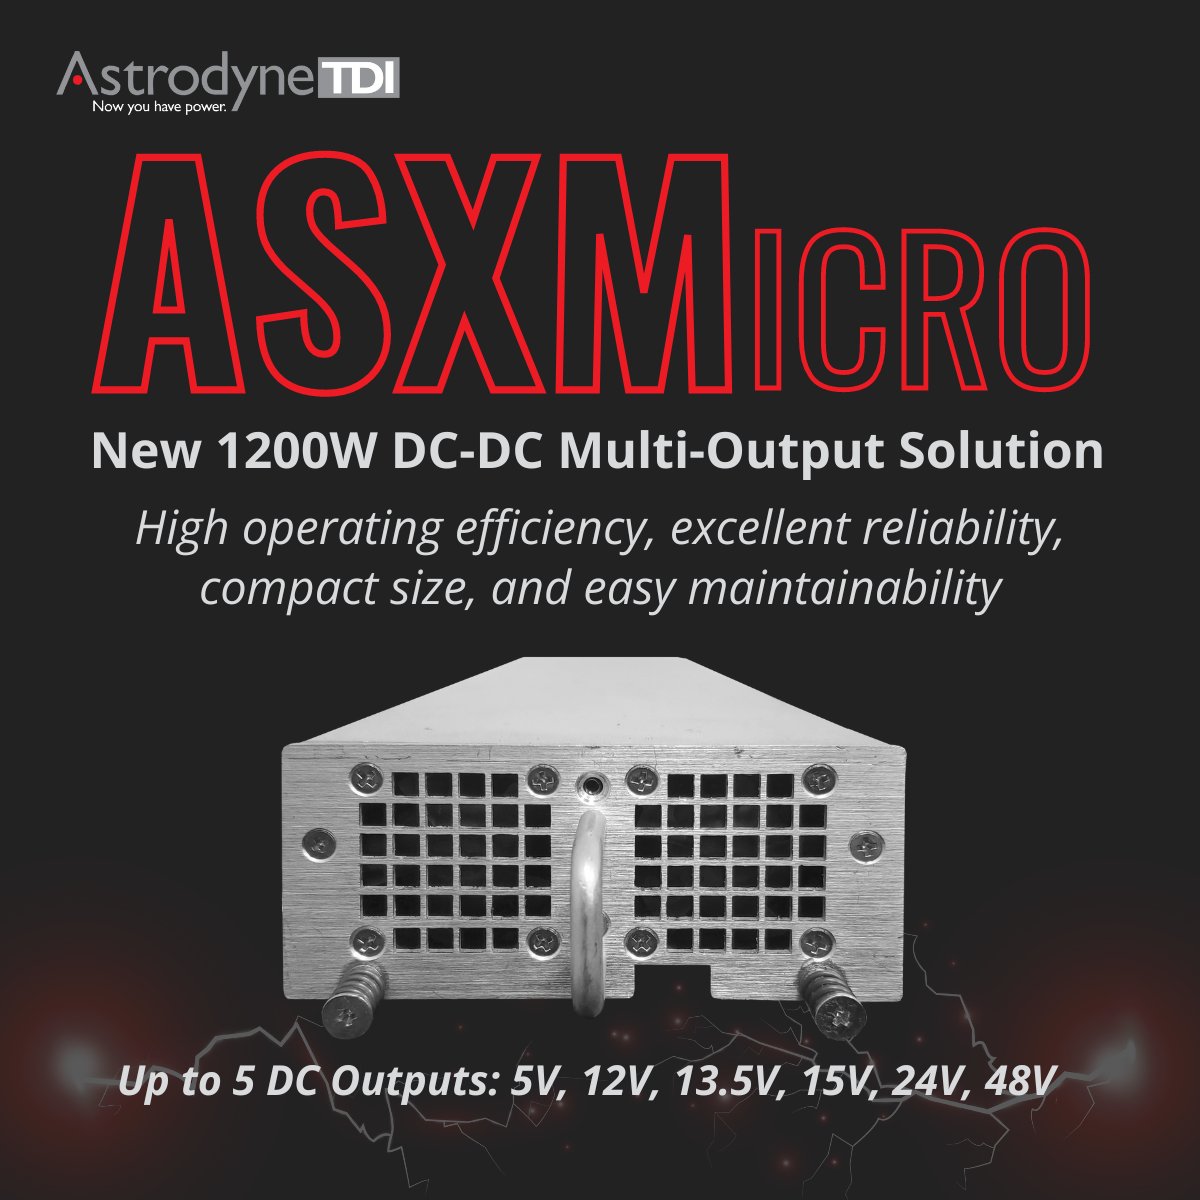 Introducing the ASXMicro - our latest innovation in power solutions! 💡  hubs.ly/Q02w9wws0

 #ASXMicro #PowerSolutions #Innovation #Technology #Medical #Semiconductor.